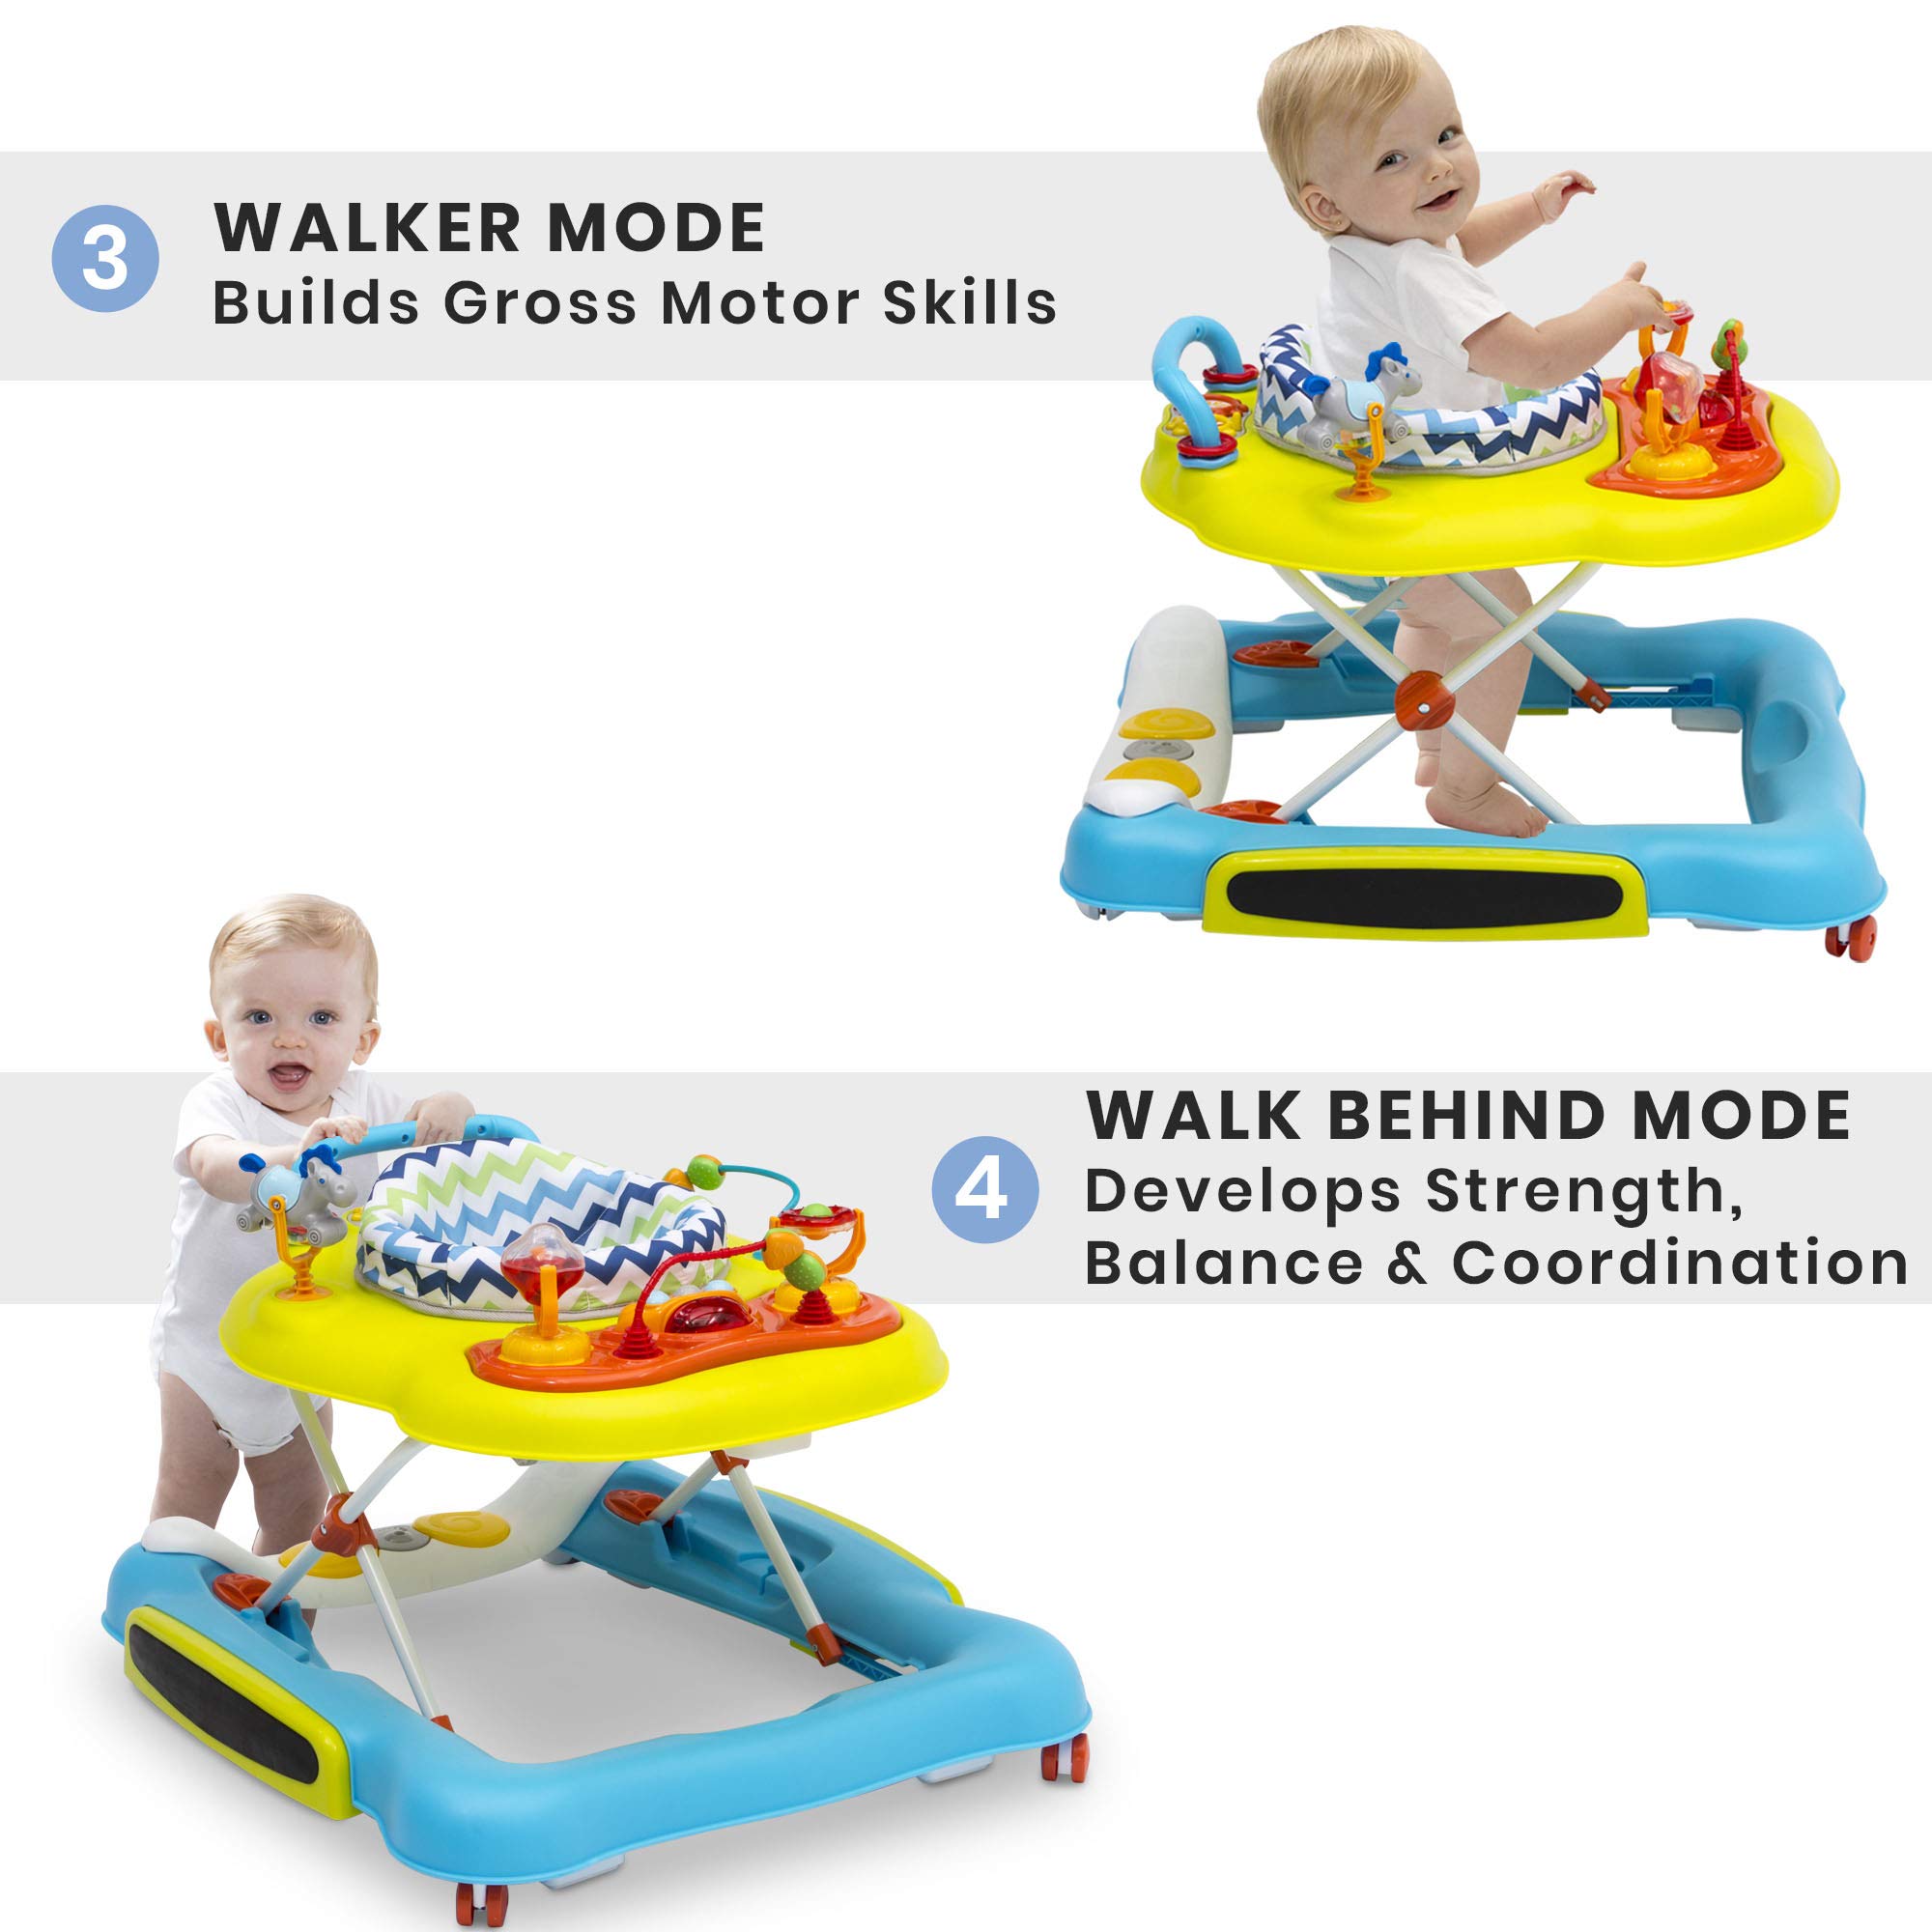 Delta Children 4-in-1 Discover & Play Musical Walker - Features 360 Degree Swivel Seat, Rocker and Walker Mode, Step-to-Play Music, Machine-Washable Seat, Blue/Green